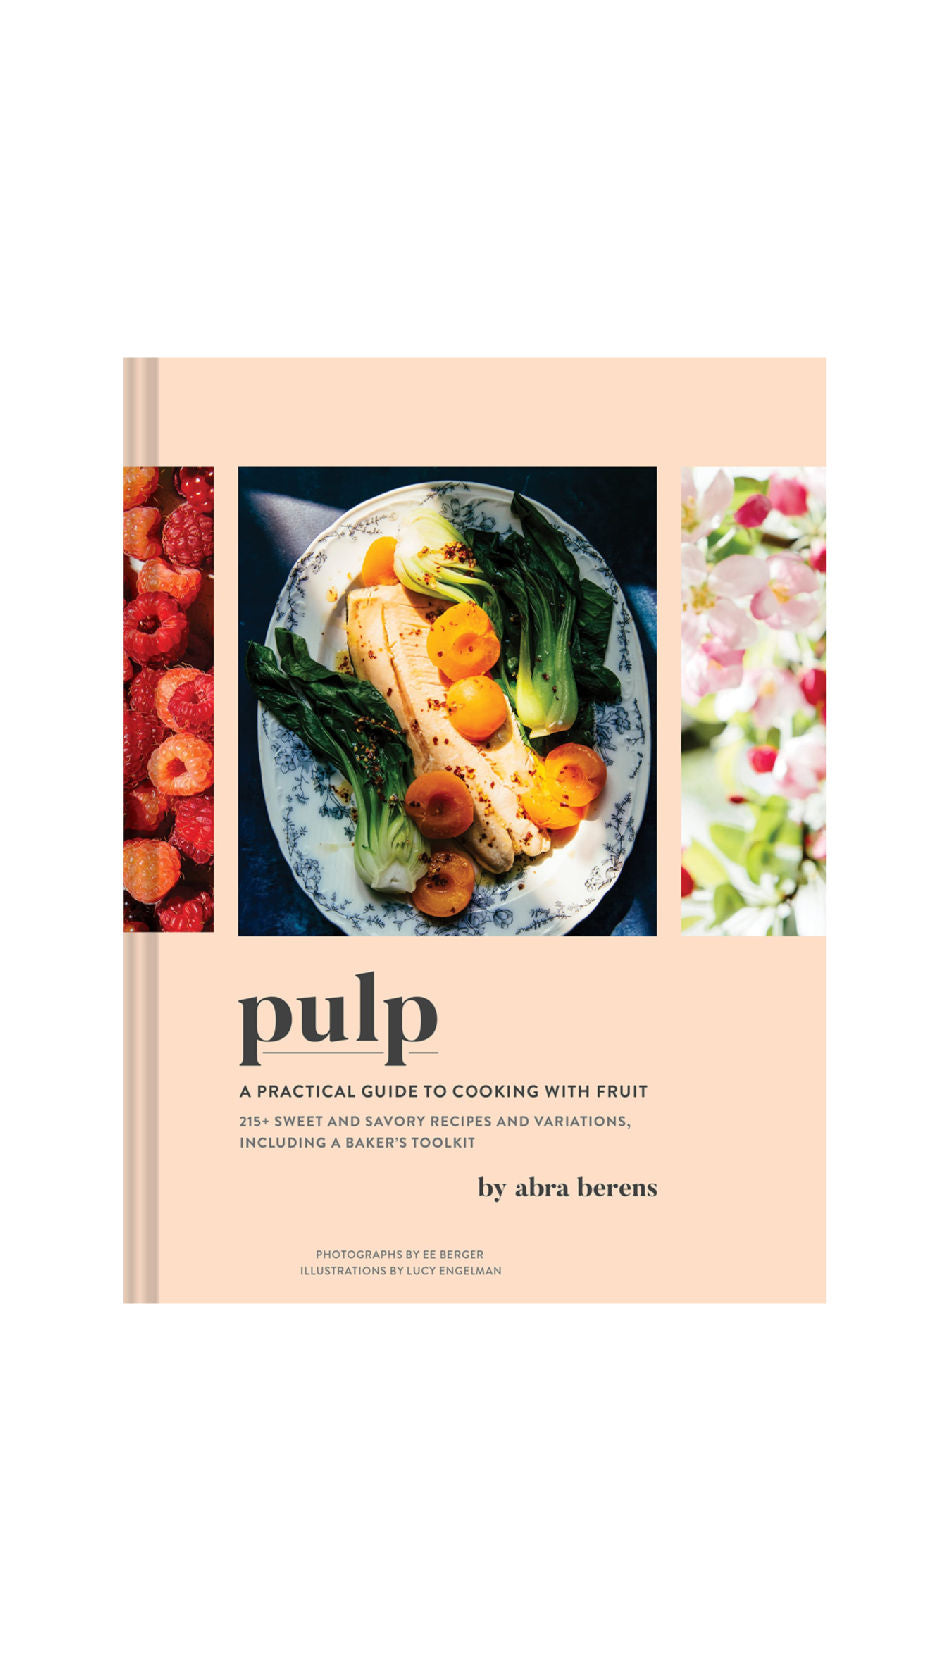 Pulp: A Practical Guide to Cooking with Fruit / ABRA BERENS